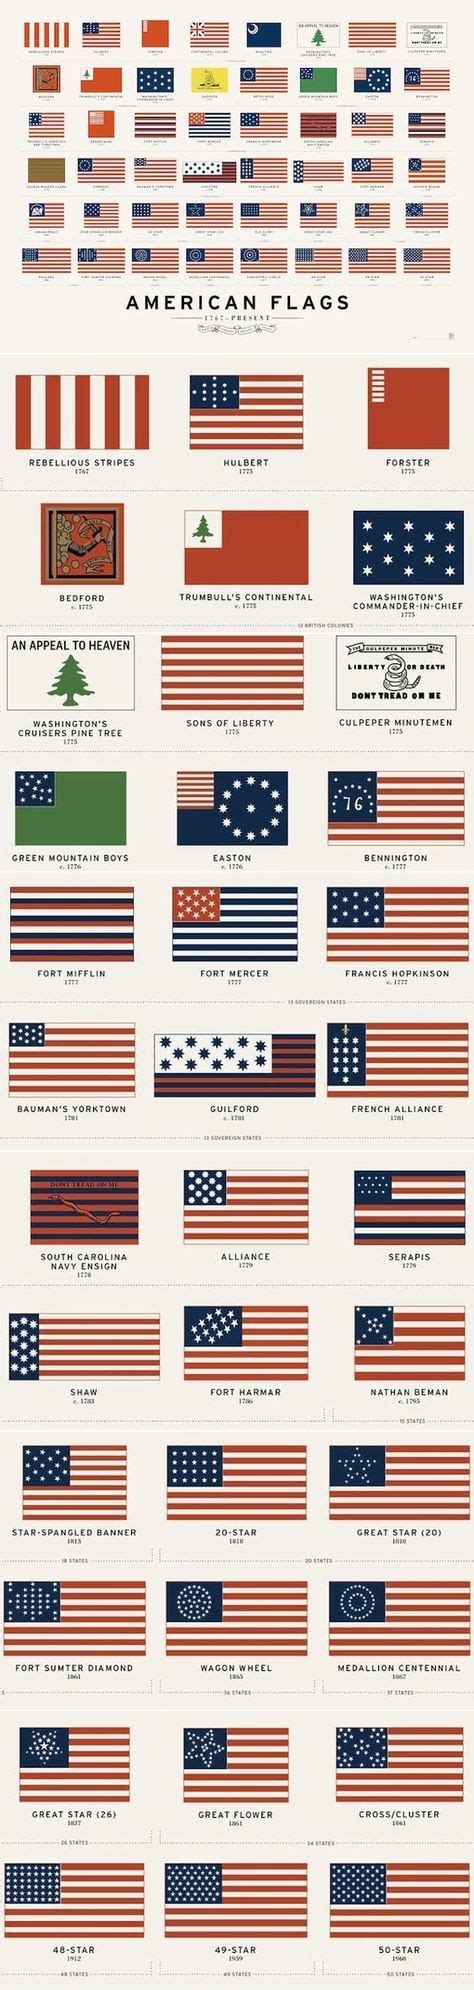 American Flags With Images History Flag American Flag